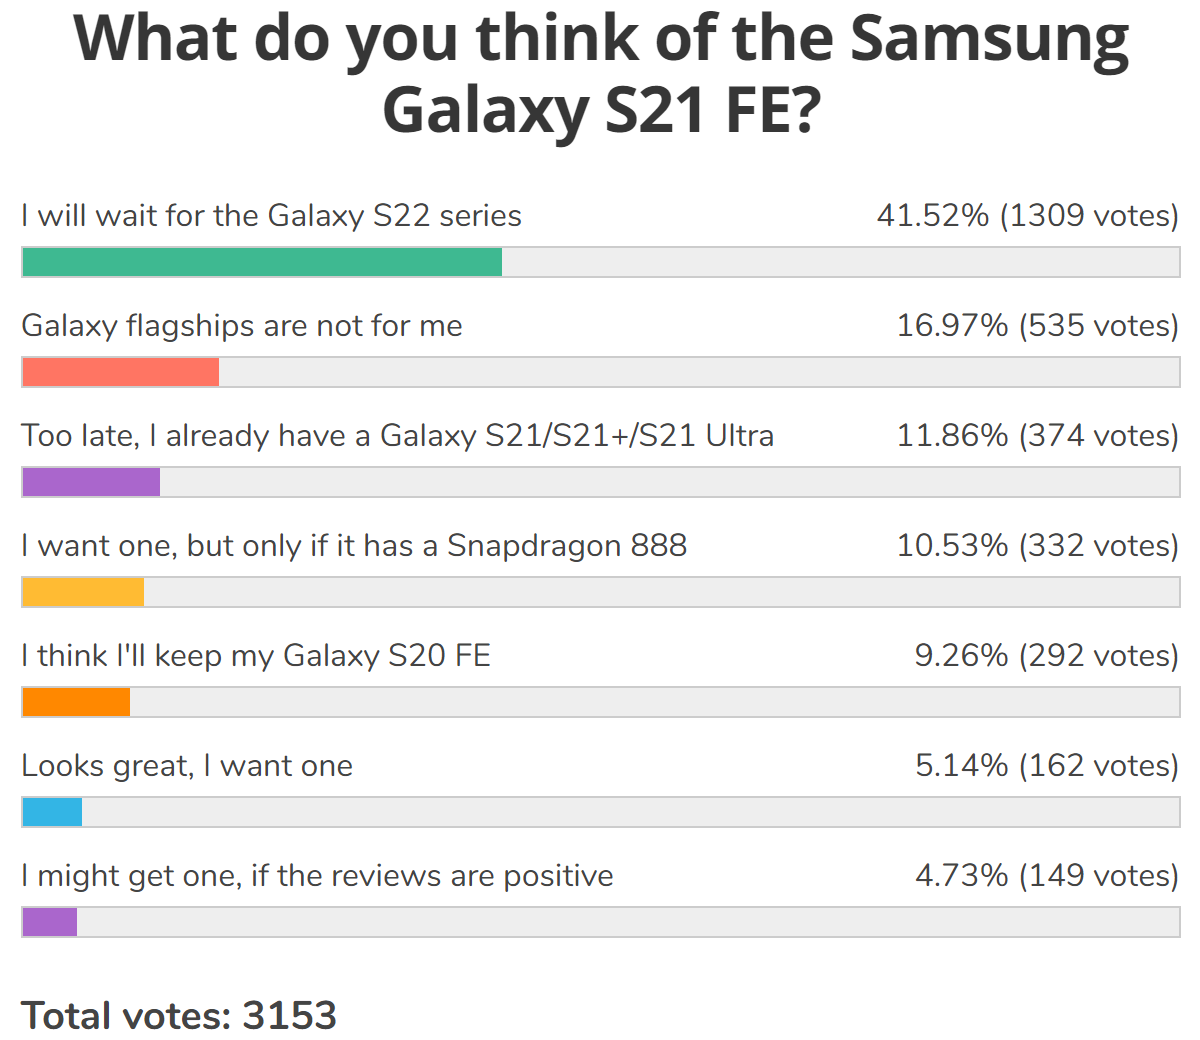 Weekly poll results: the Samsung Galaxy S21 FE arrives too late